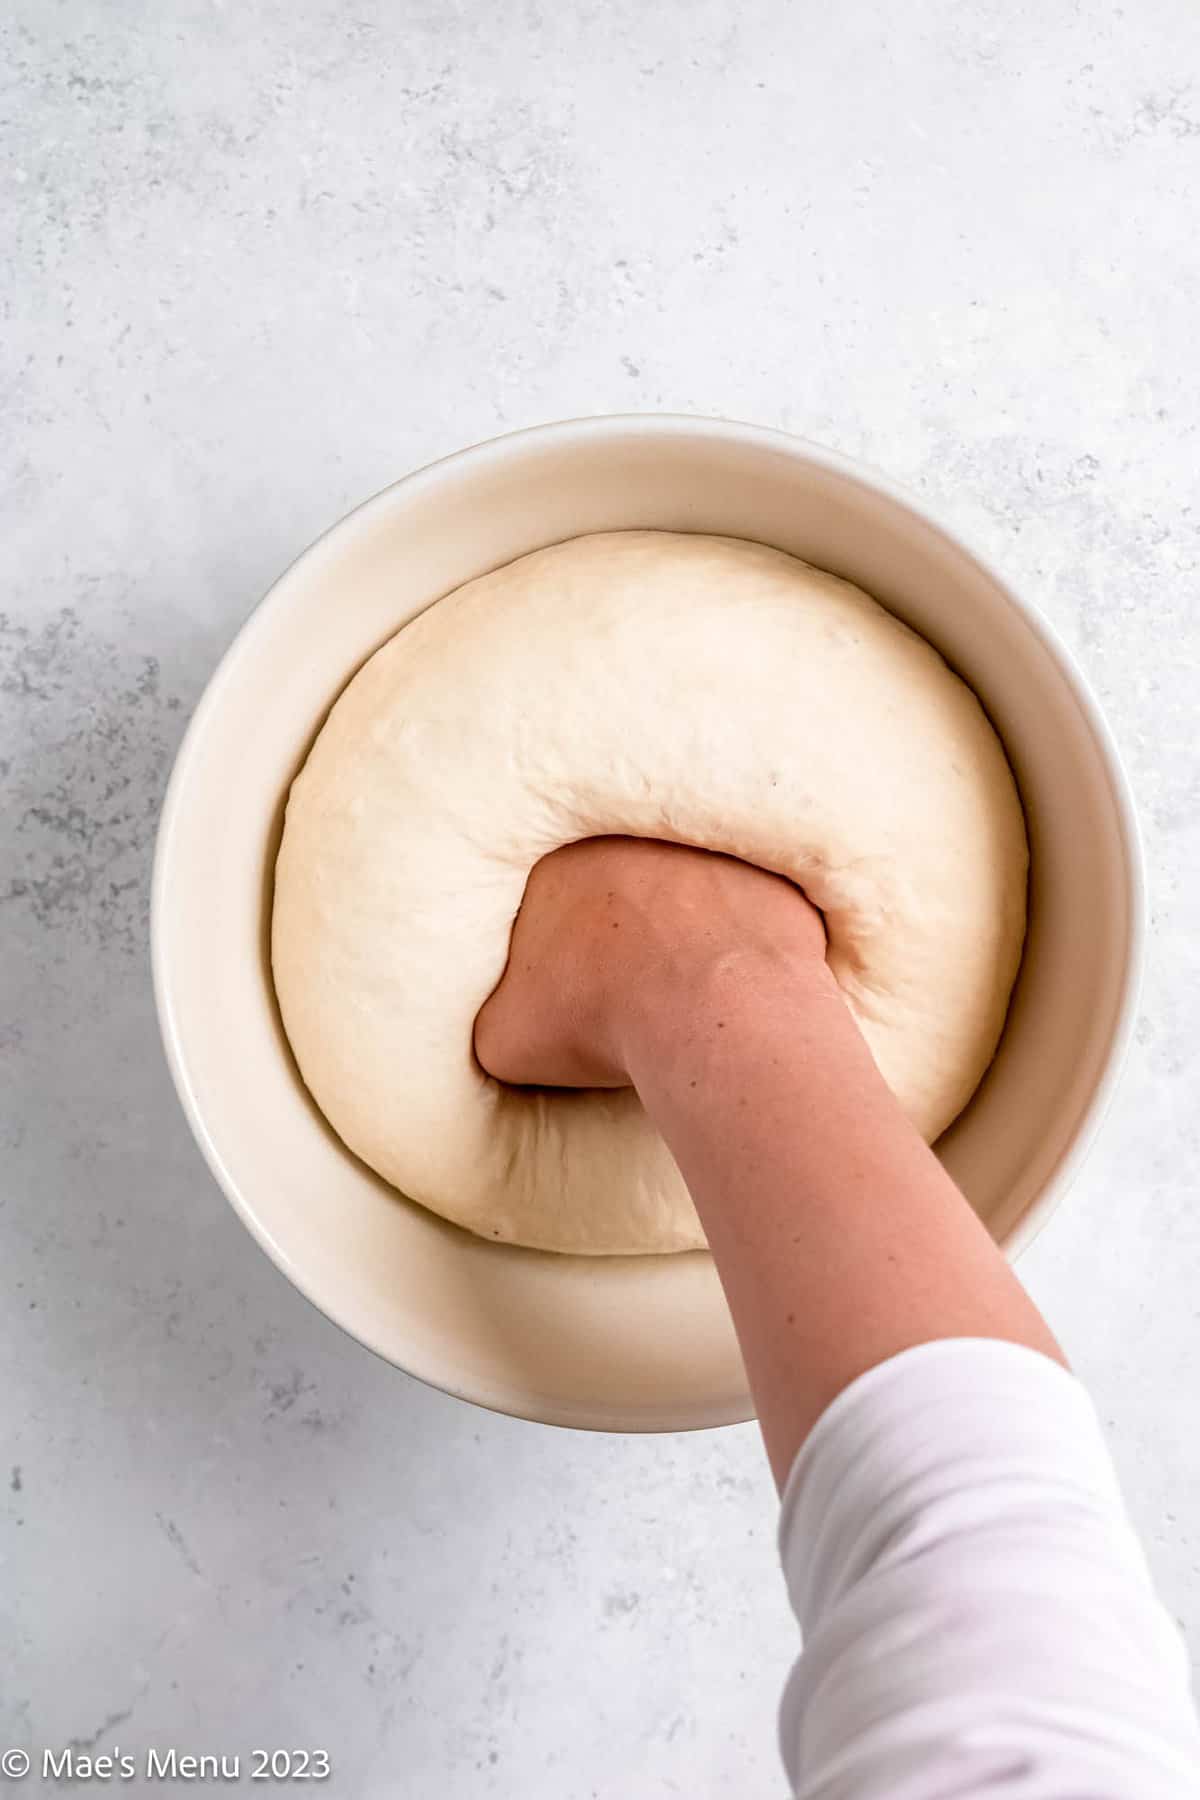 Punching the loaf of bread down.